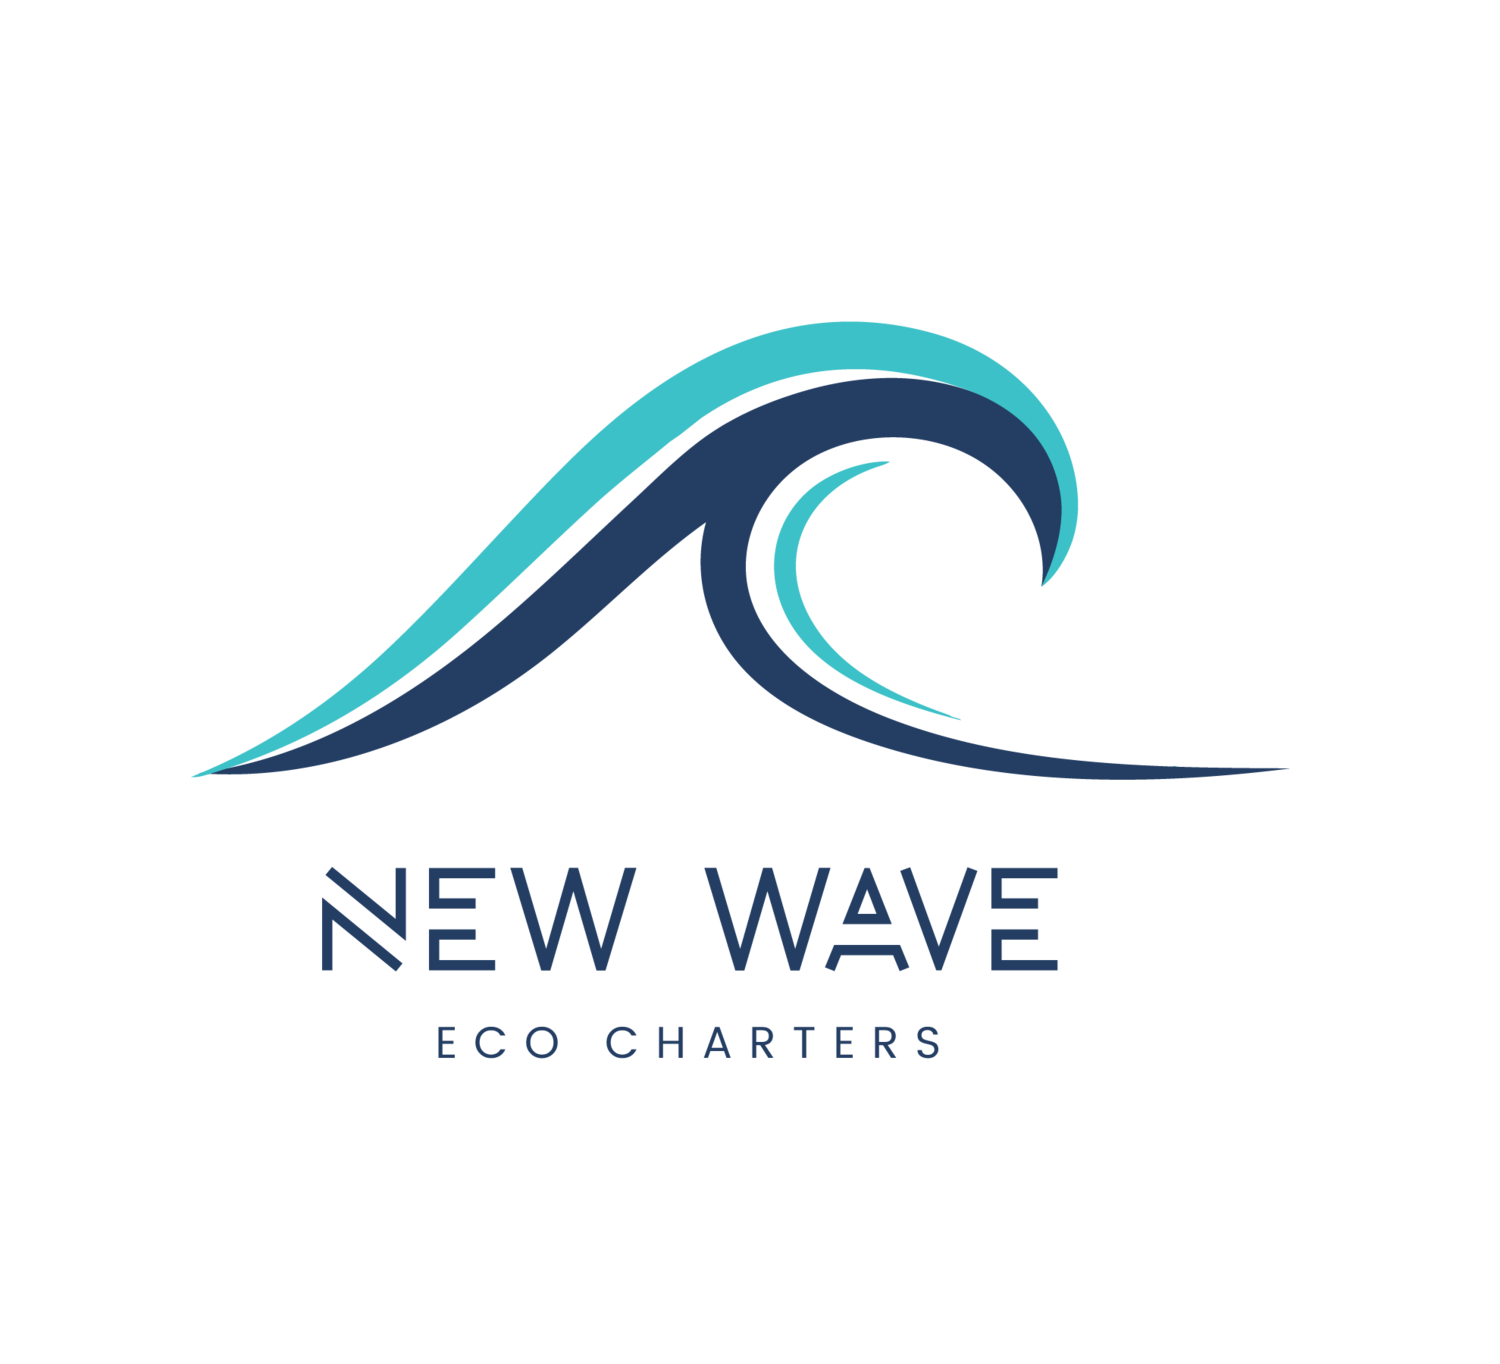 New Wave Eco Charters